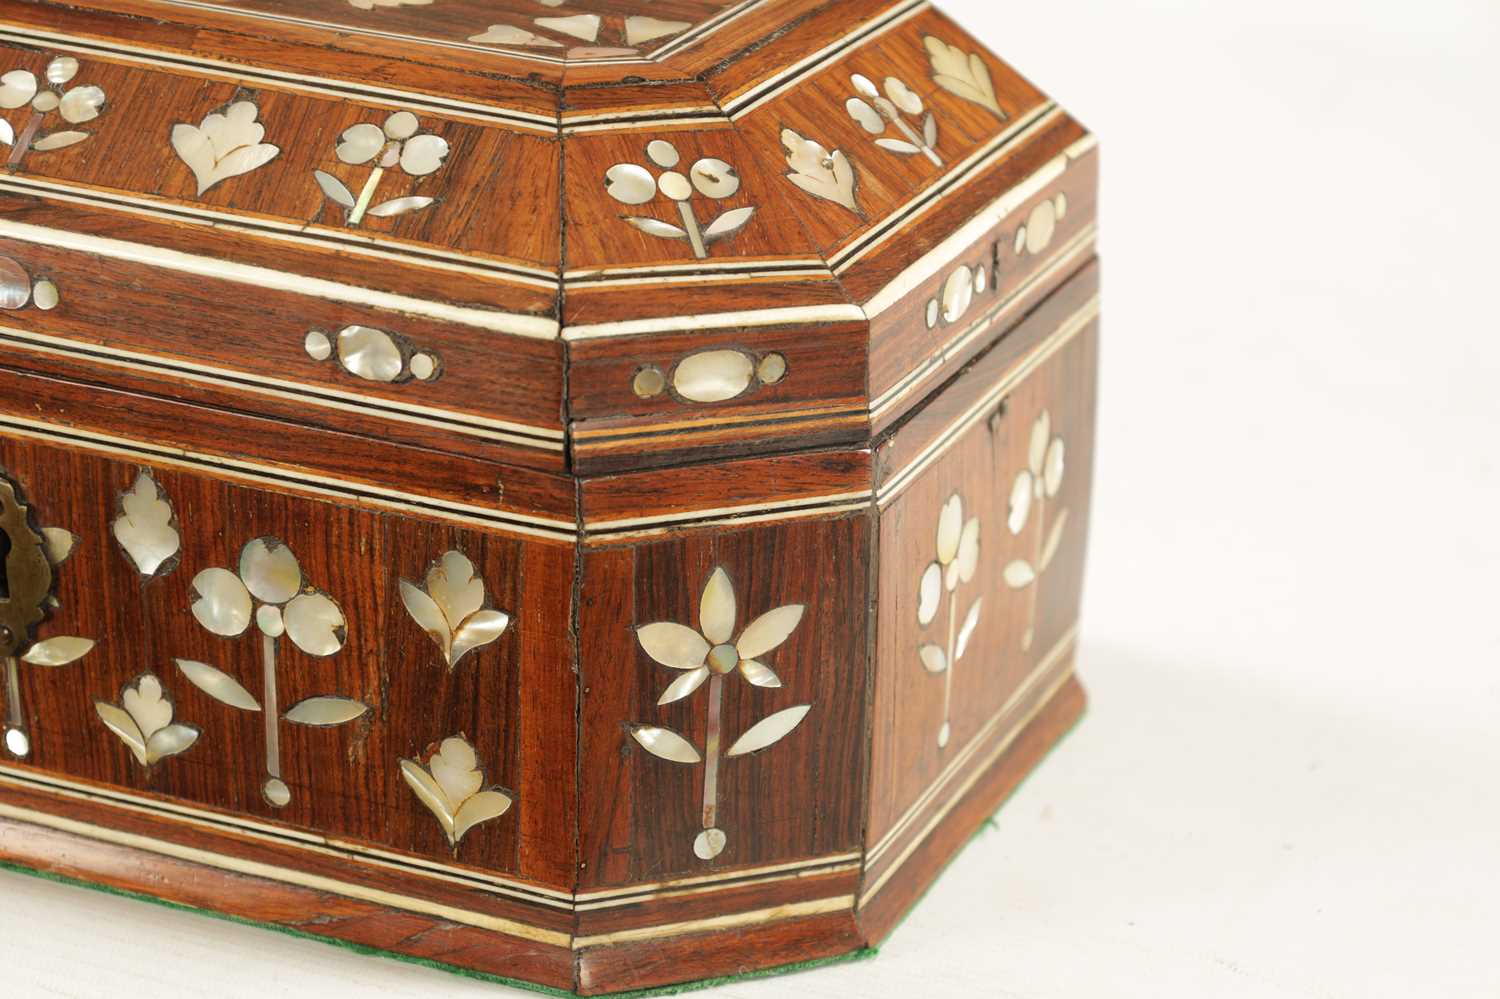 AN EARLY 18TH CENTURY SOUTH AMERICAN MOTHER OF PEARL INLAID BOX - Image 4 of 9